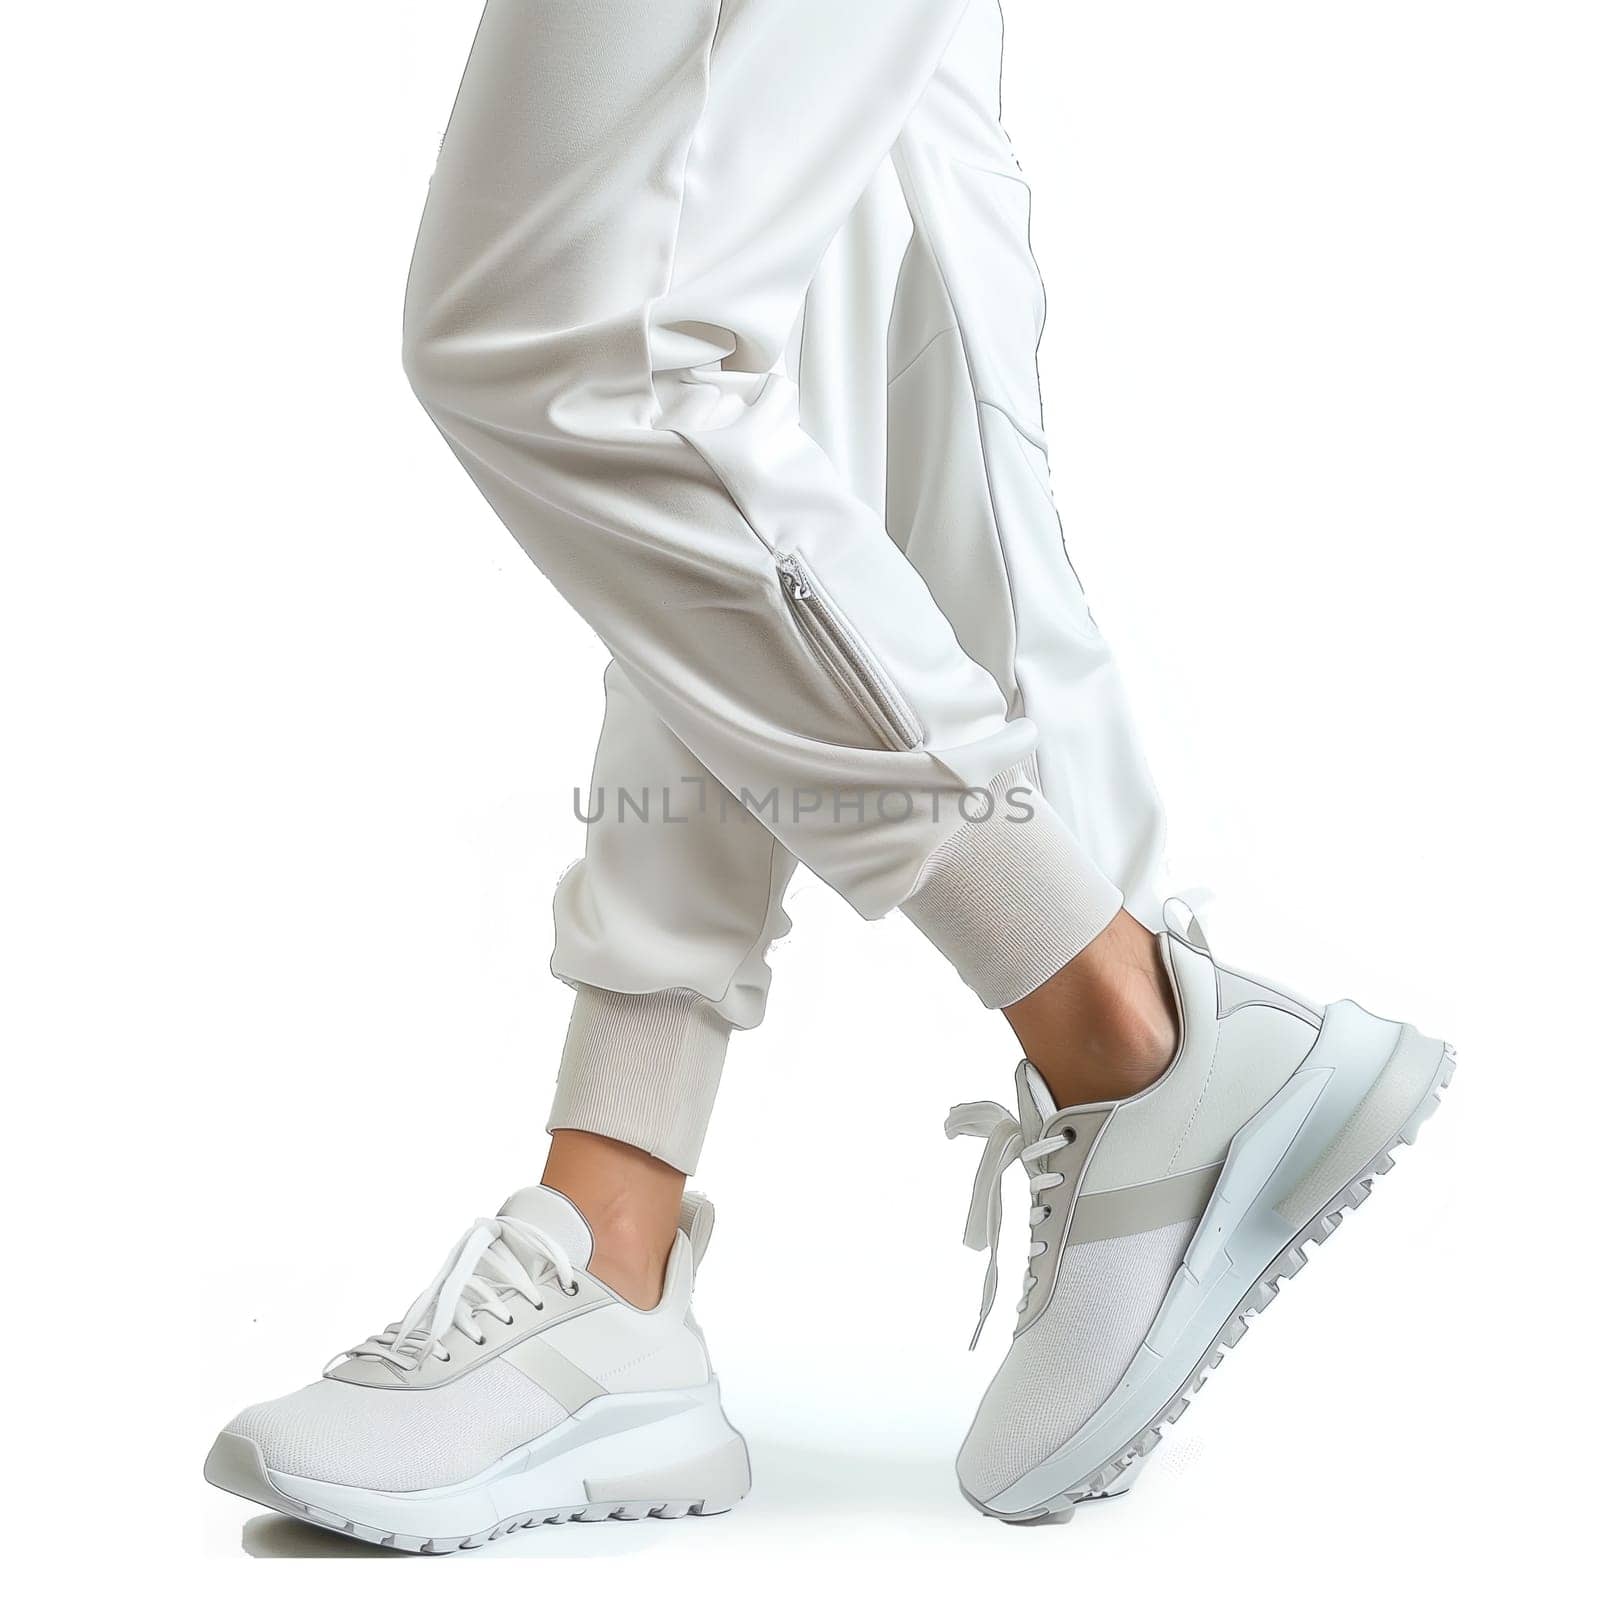 Legs in white pants and boots ai generated image